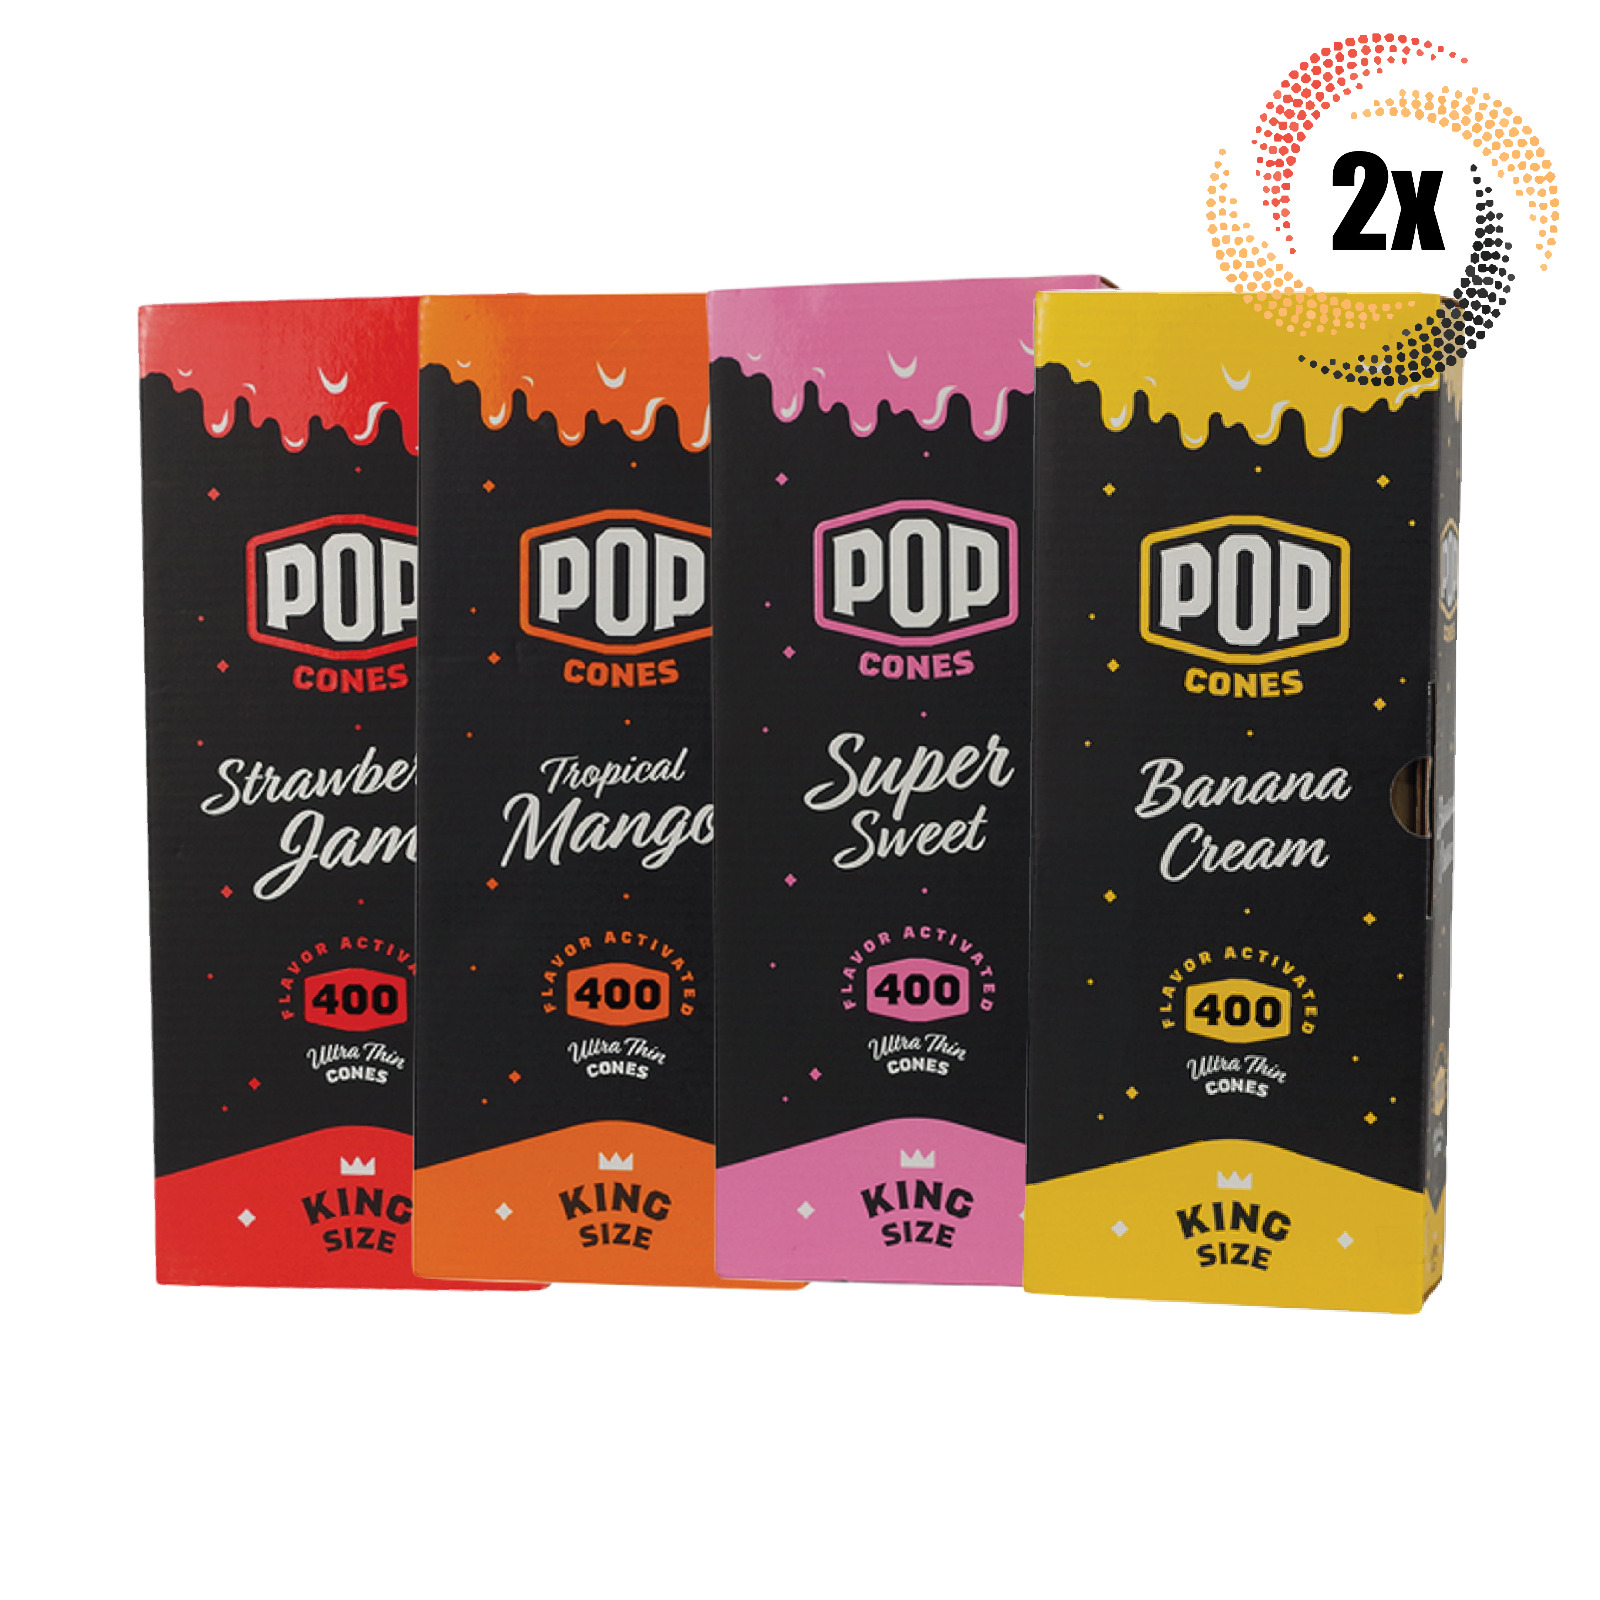 2x Boxes Pop Variety Cones | 400 Cones Each | King Size | Mix & Match Flavors